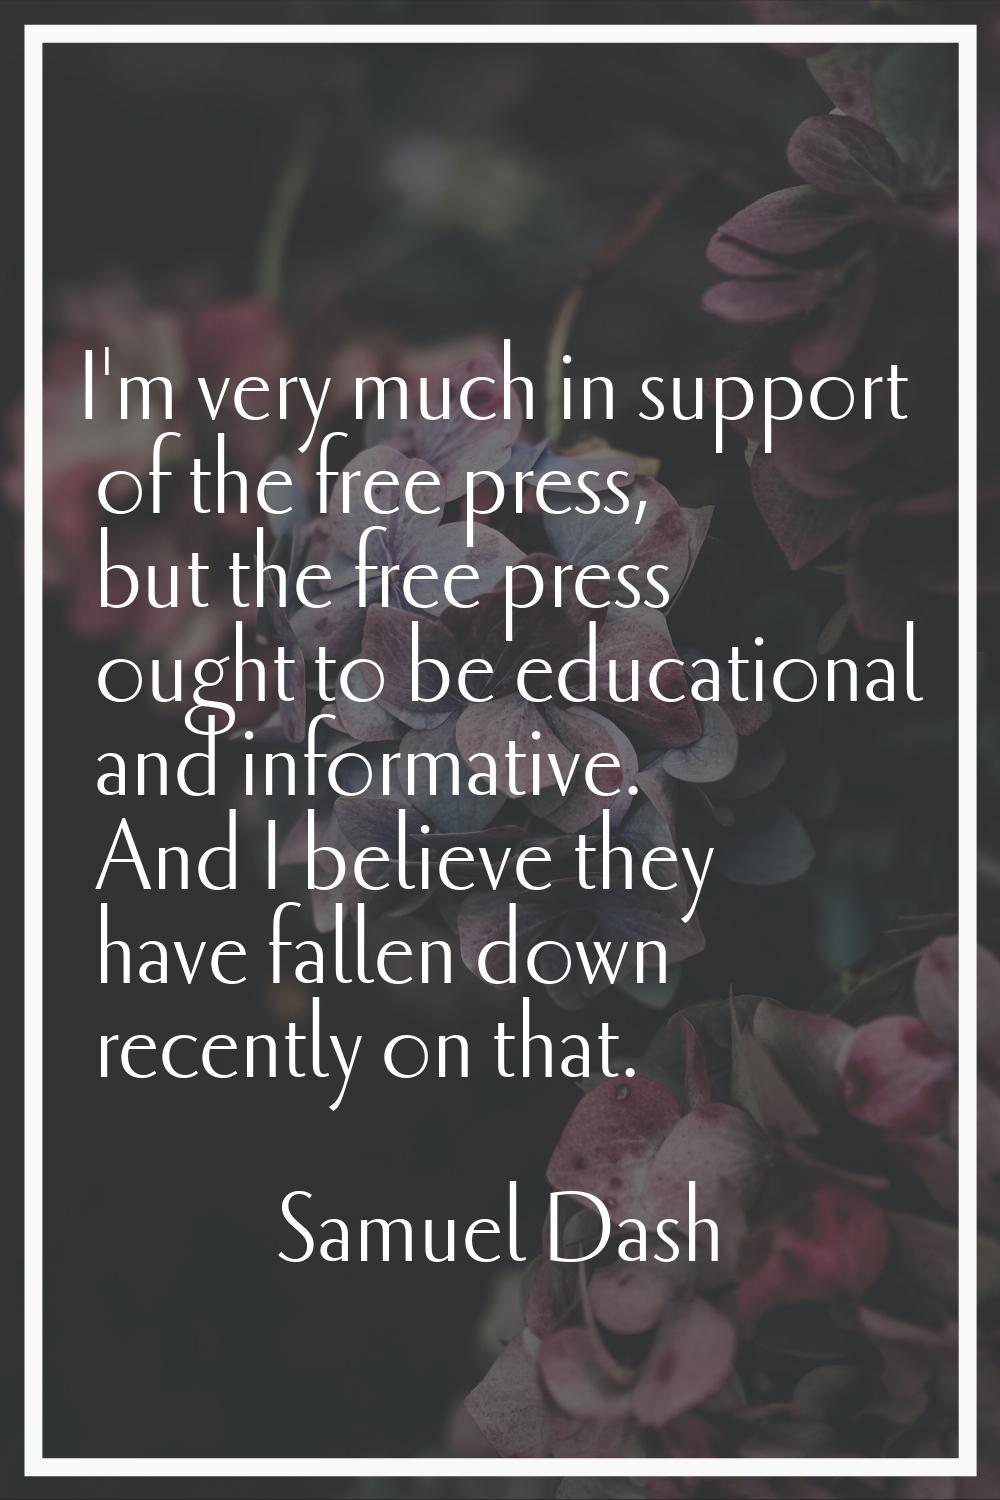 I'm very much in support of the free press, but the free press ought to be educational and informat